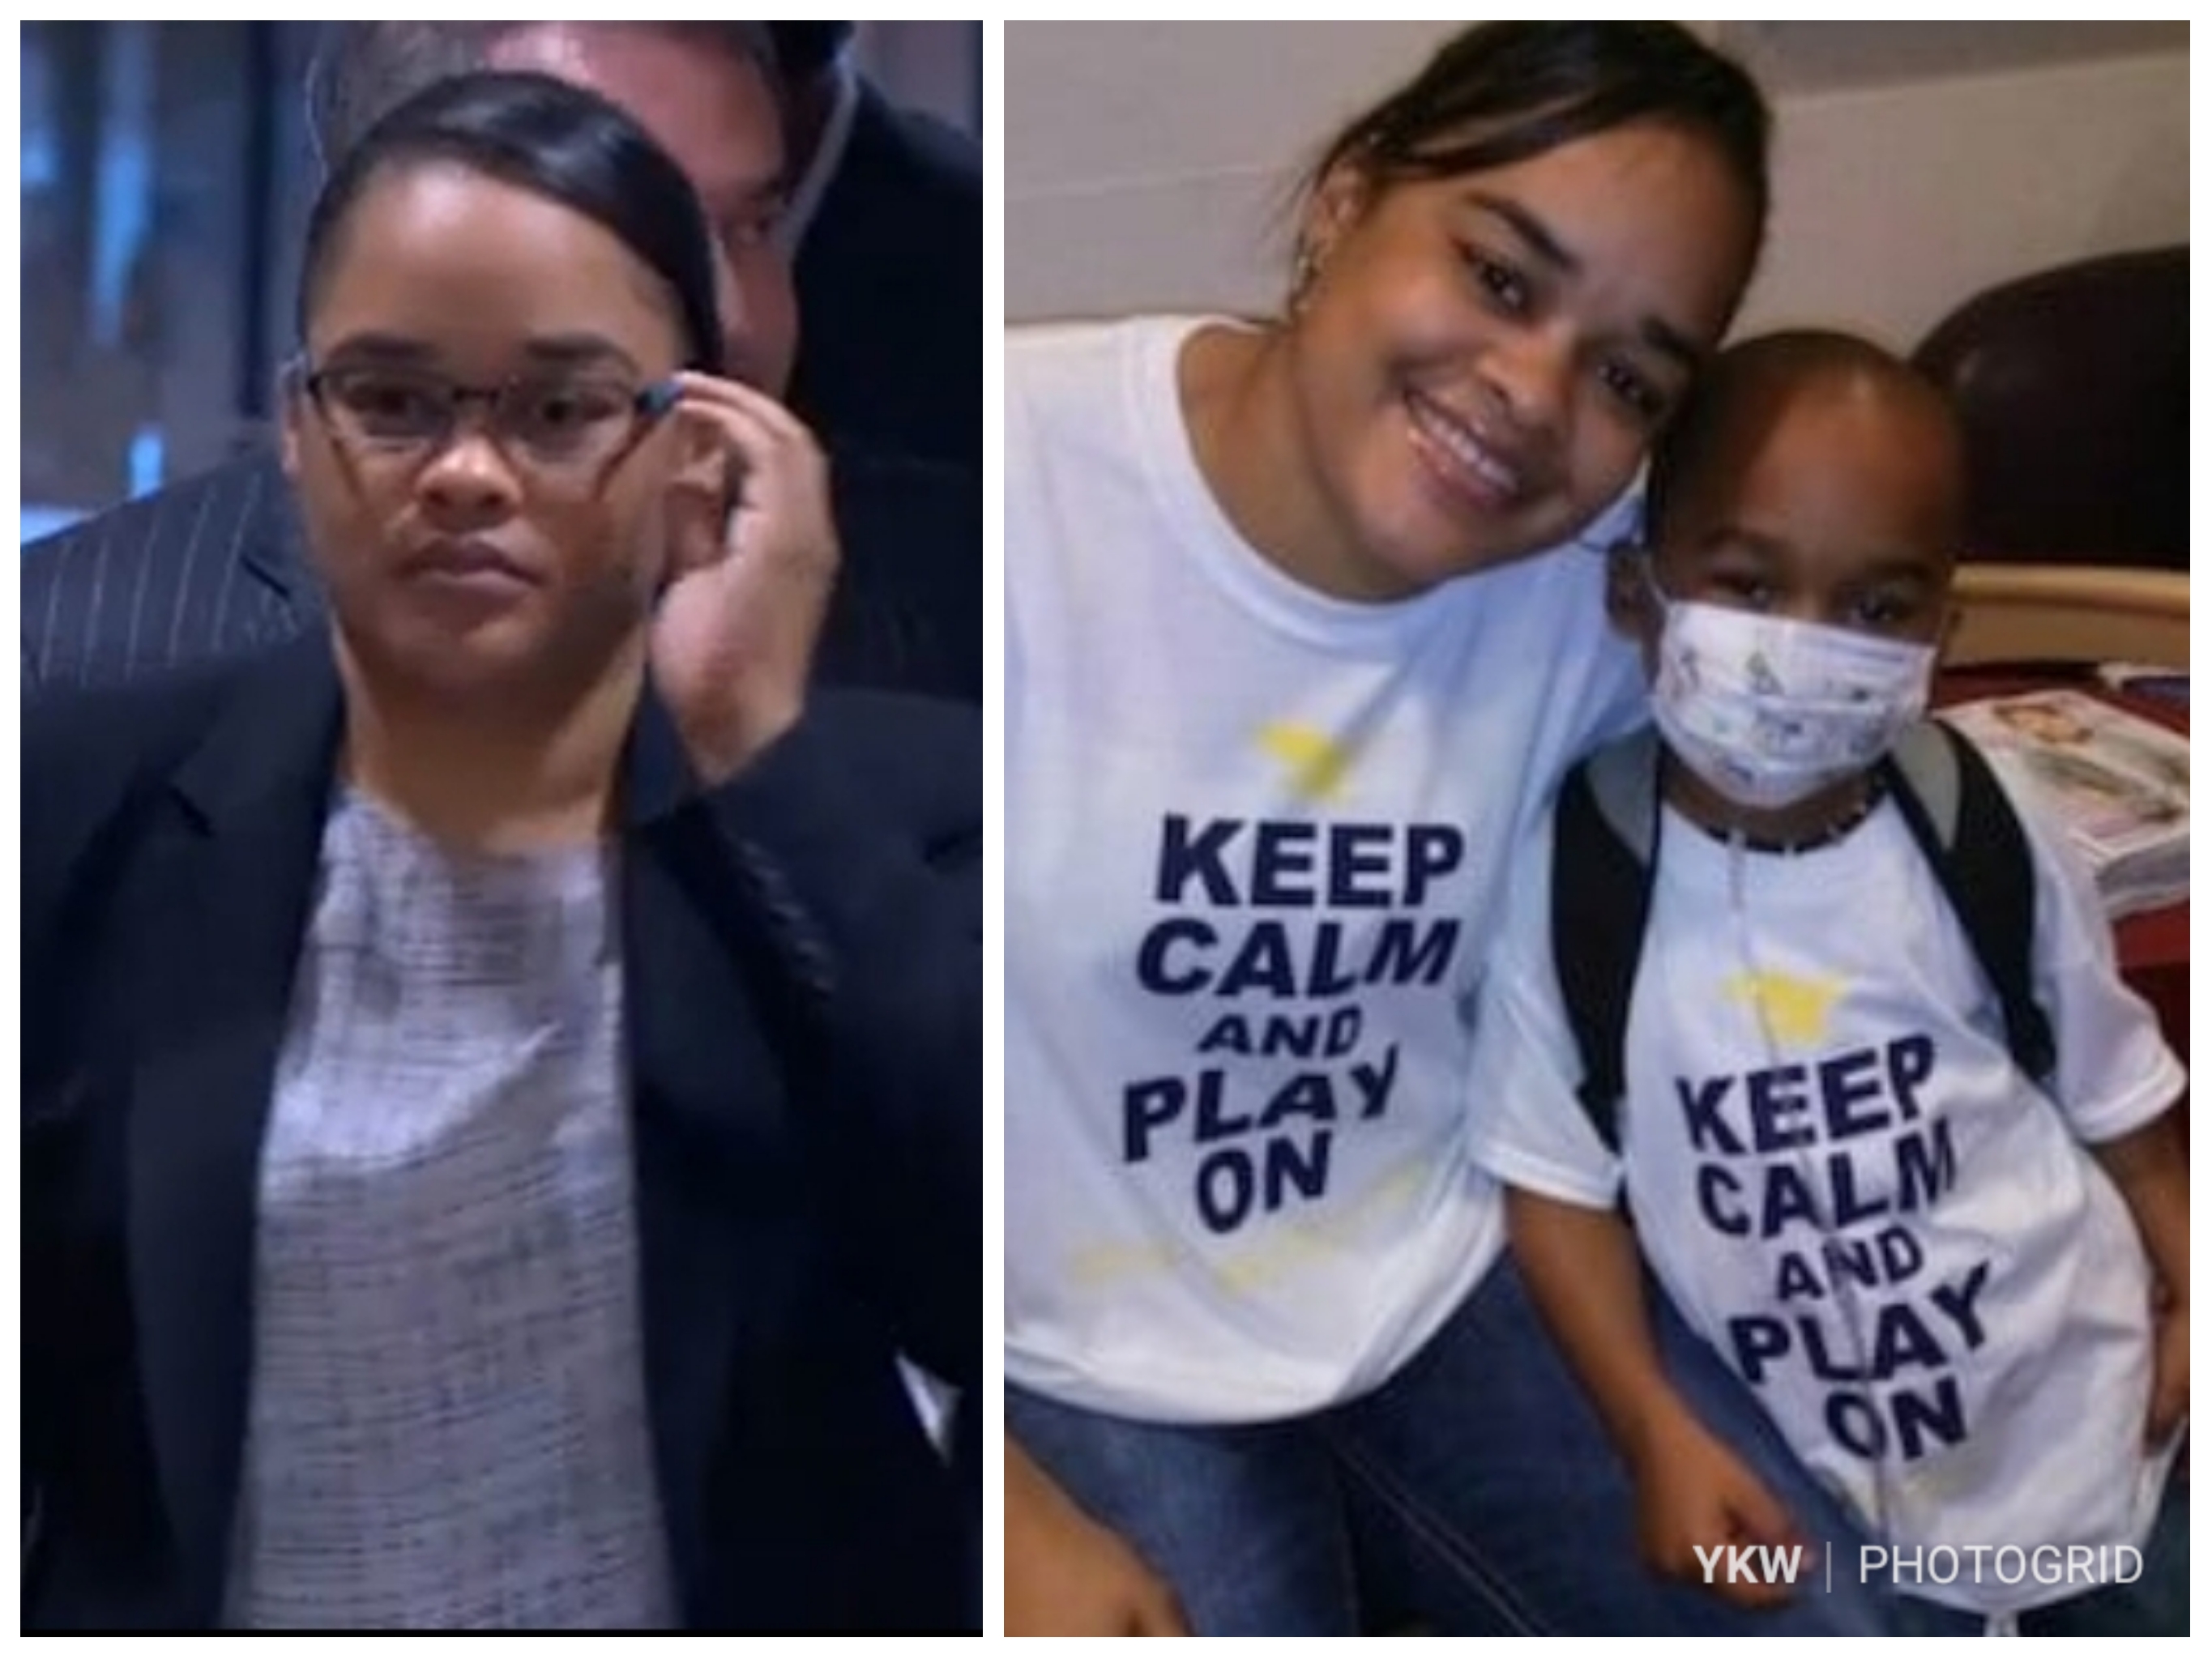 Dallas Mom Sentenced To 6 Years In Prison For Faking Son’s Illnesses